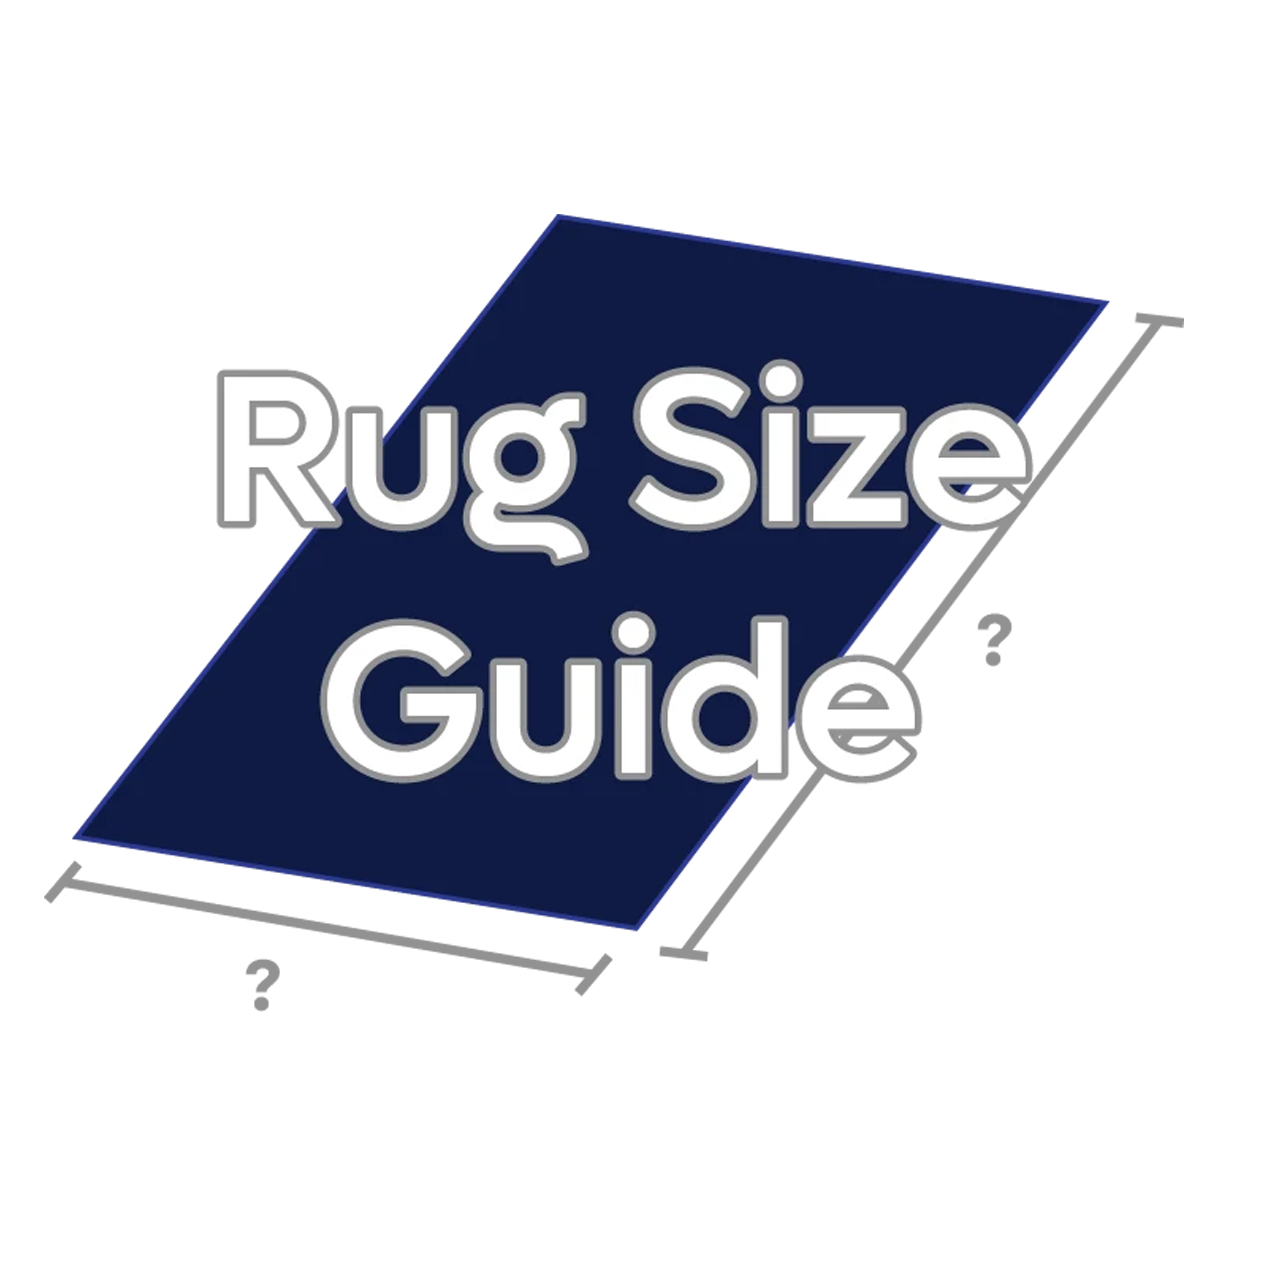 Help Rug Size Guide